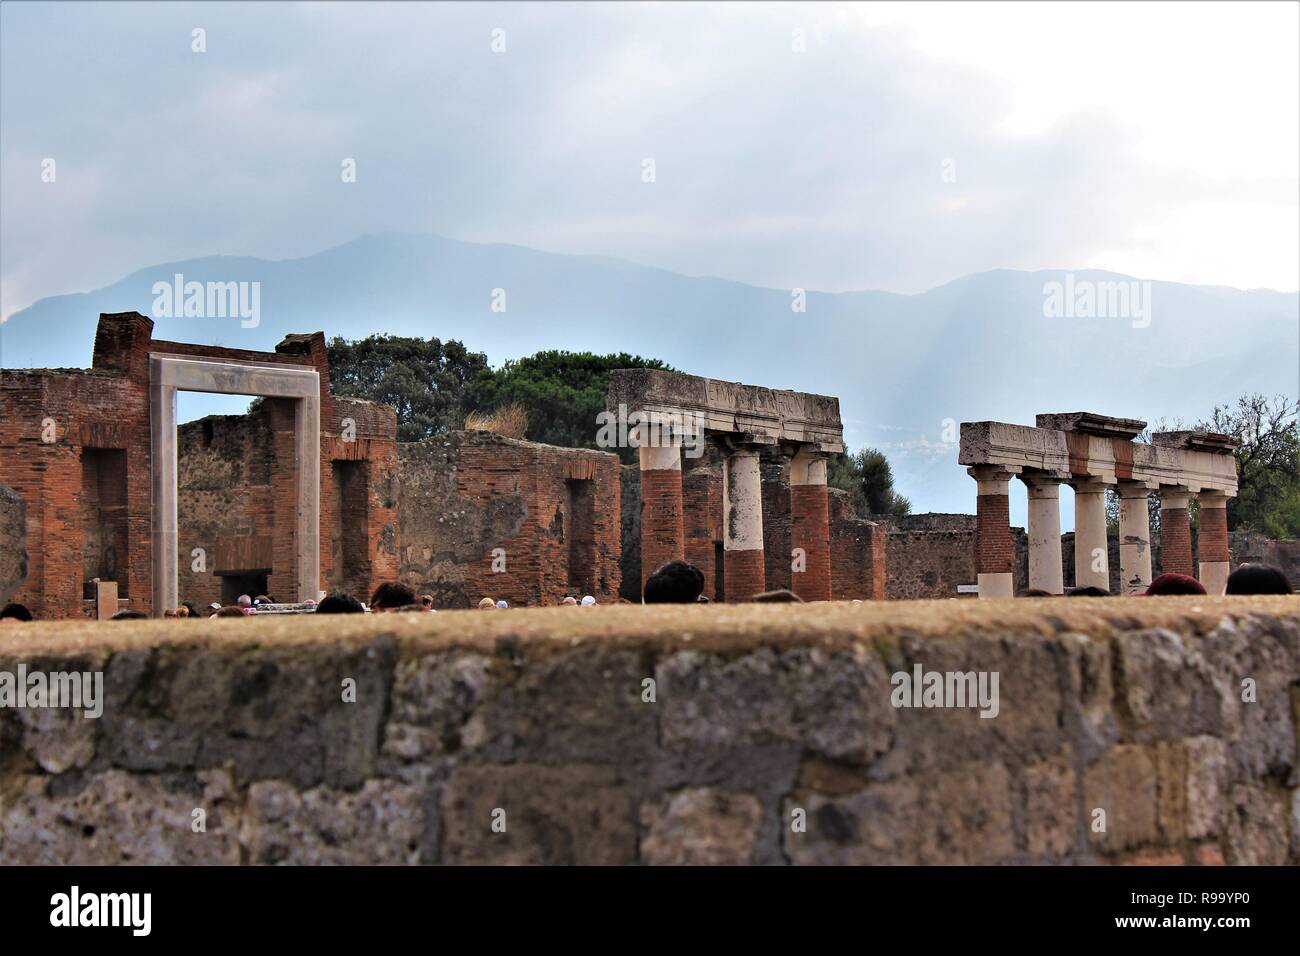 Pompeii, Italy - October 23rd 2018: Tourists survey ruins of the ancient city of Pompeii that was destroyed by the eruption of Mount Vesuvius in 79AD. Stock Photo